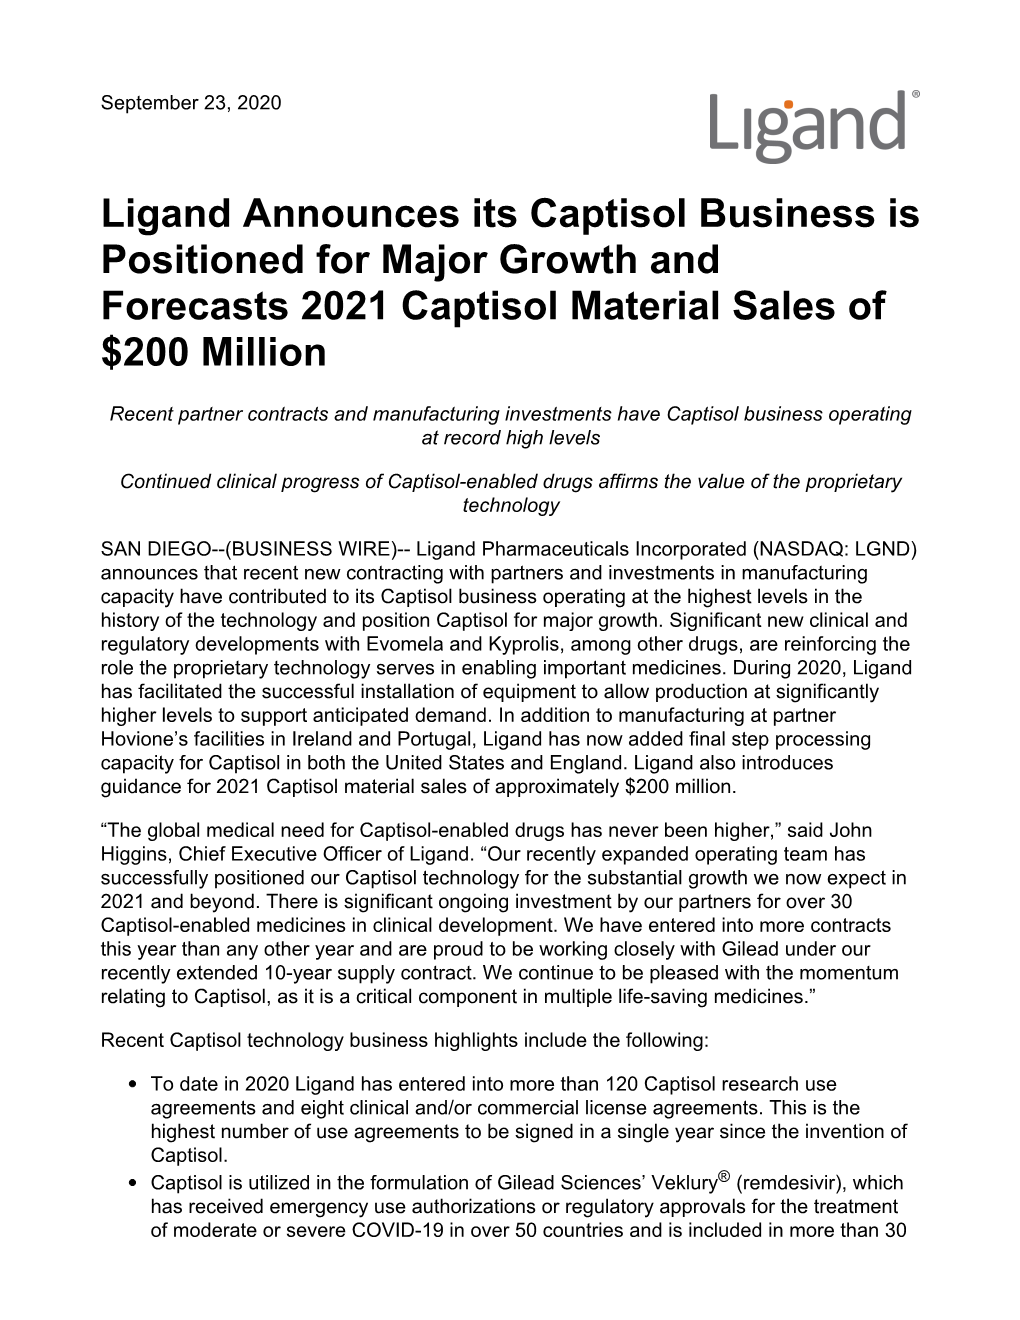 Ligand Announces Its Captisol Business Is Positioned for Major Growth and Forecasts 2021 Captisol Material Sales of $200 Million